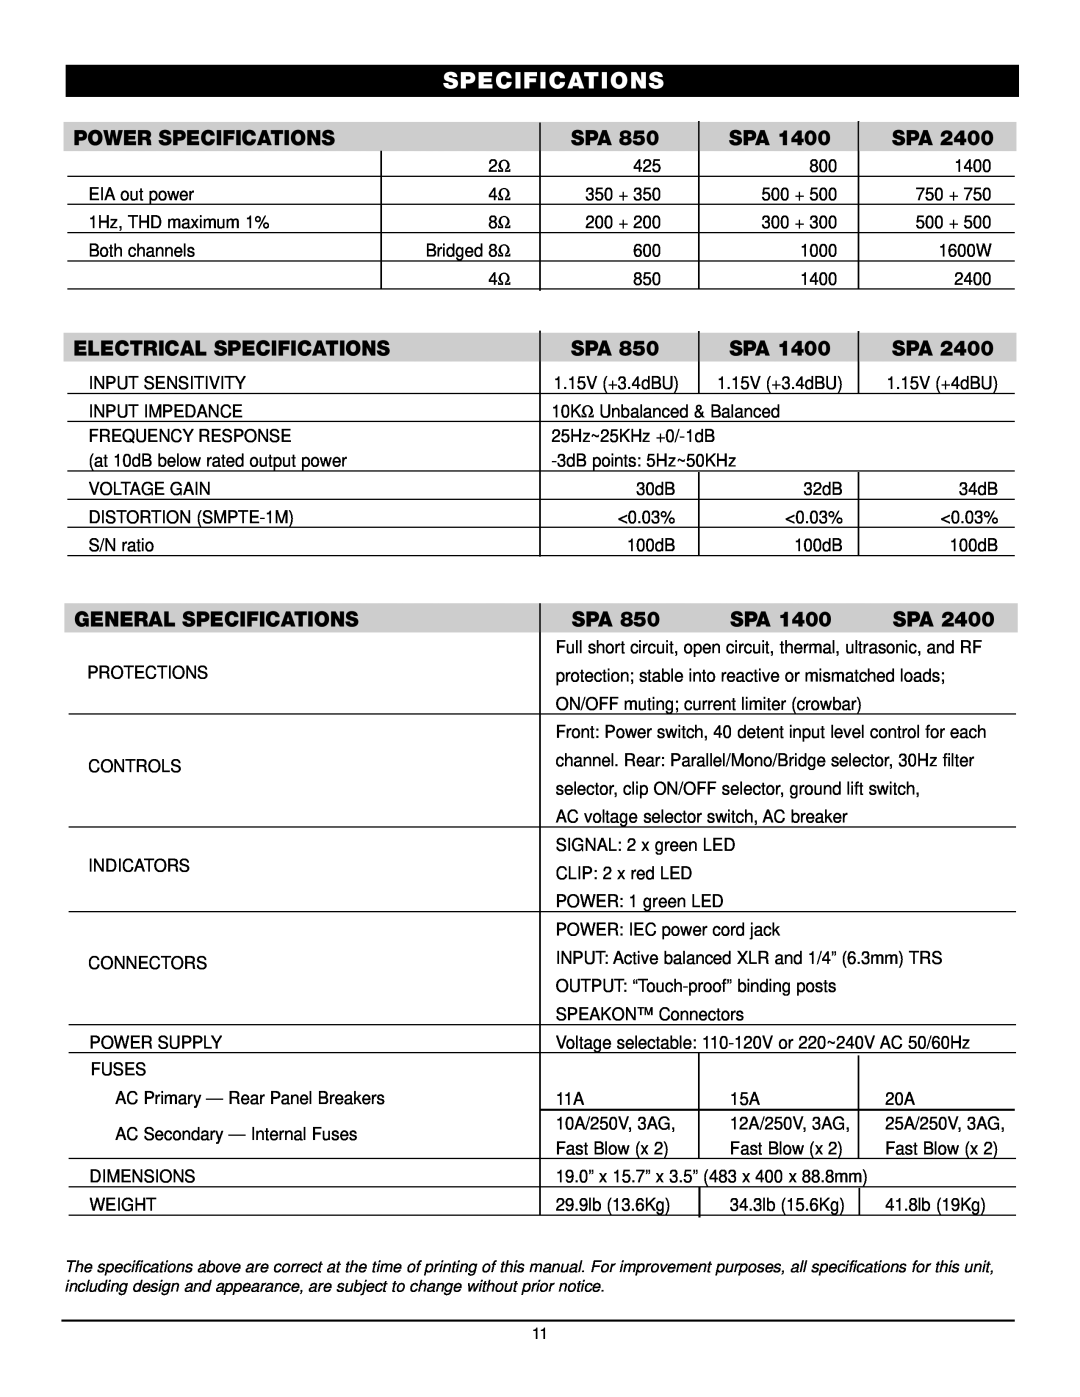 Nady Systems SPA 1400 owner manual Power Specifications, Electrical Specifications, General Specifications 